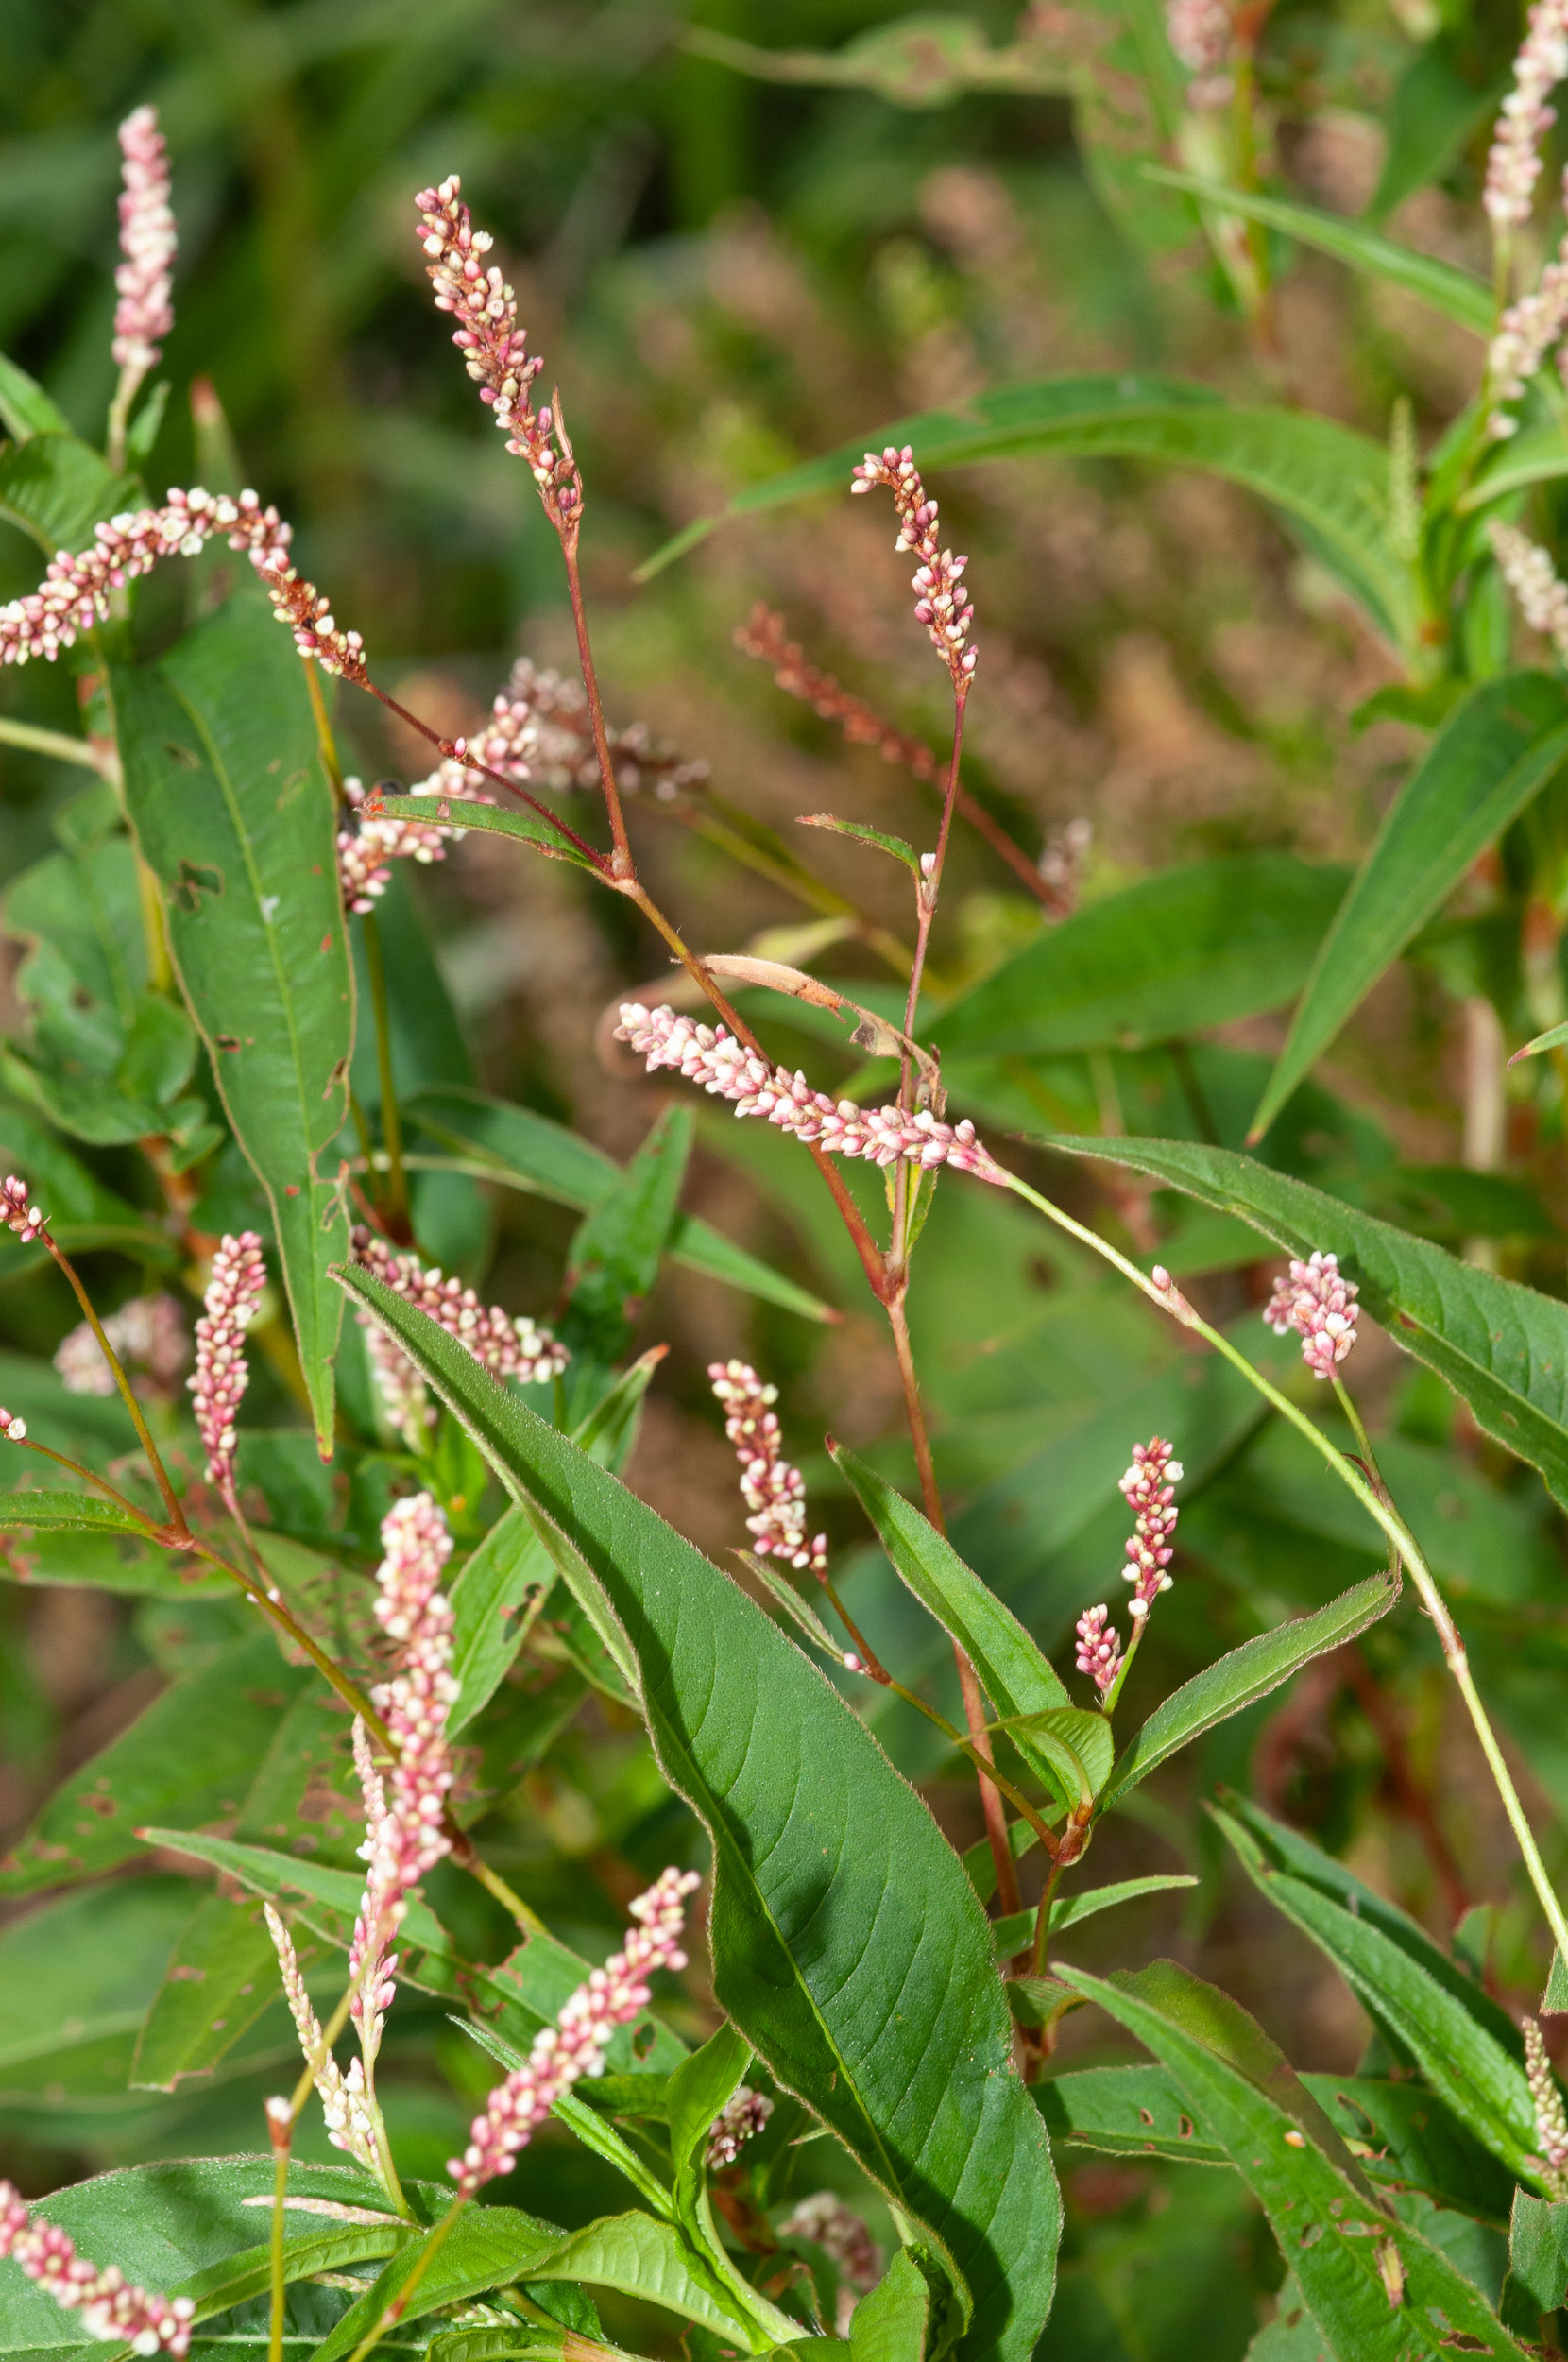 Polygonum persicaria E 138 Spotted Lady's Thumb 100+ seeds Knotweed 